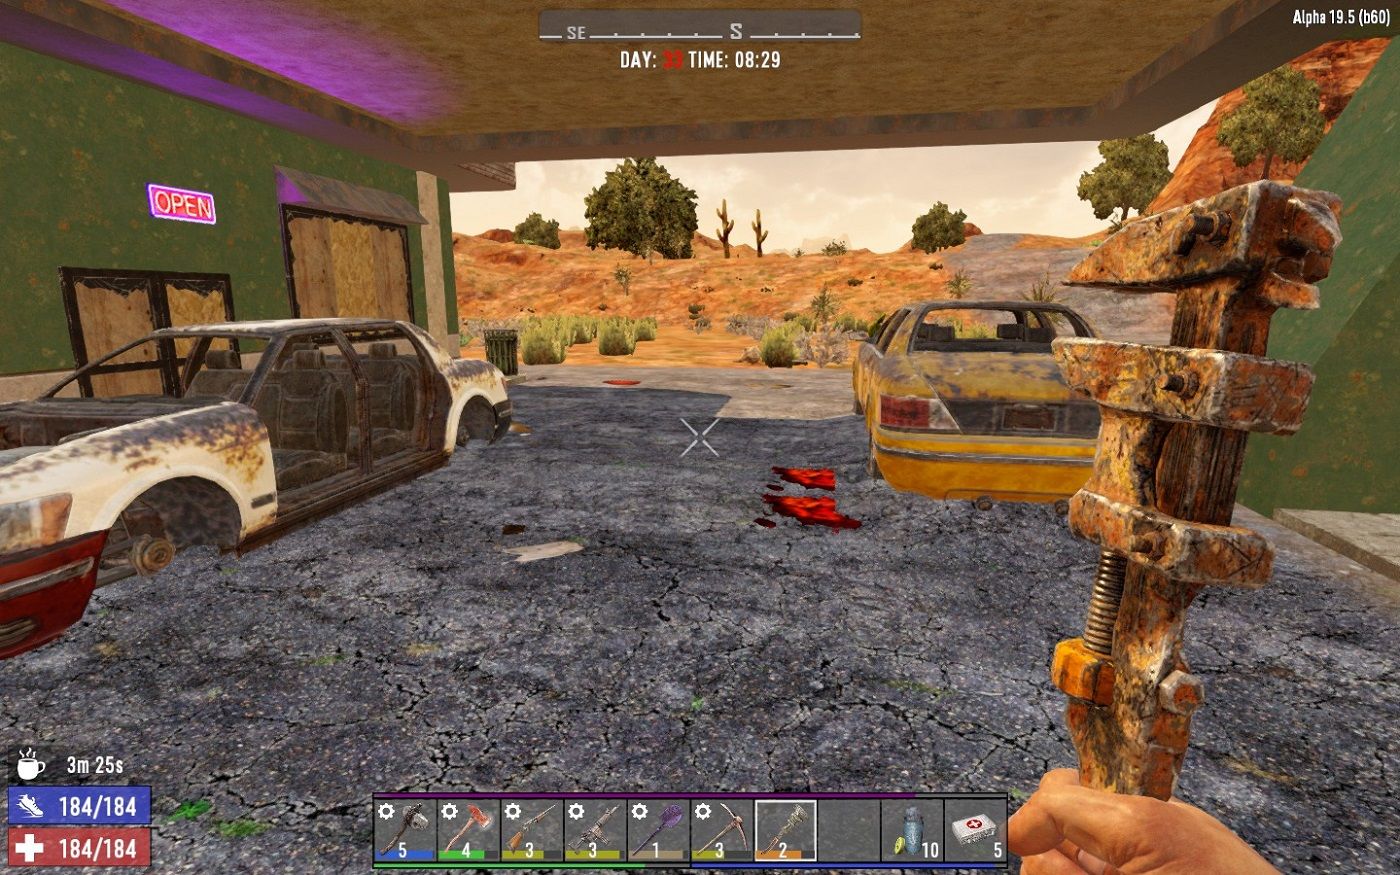 Screenshot from 7 Days to Die showing two rusty cars outside a diner.